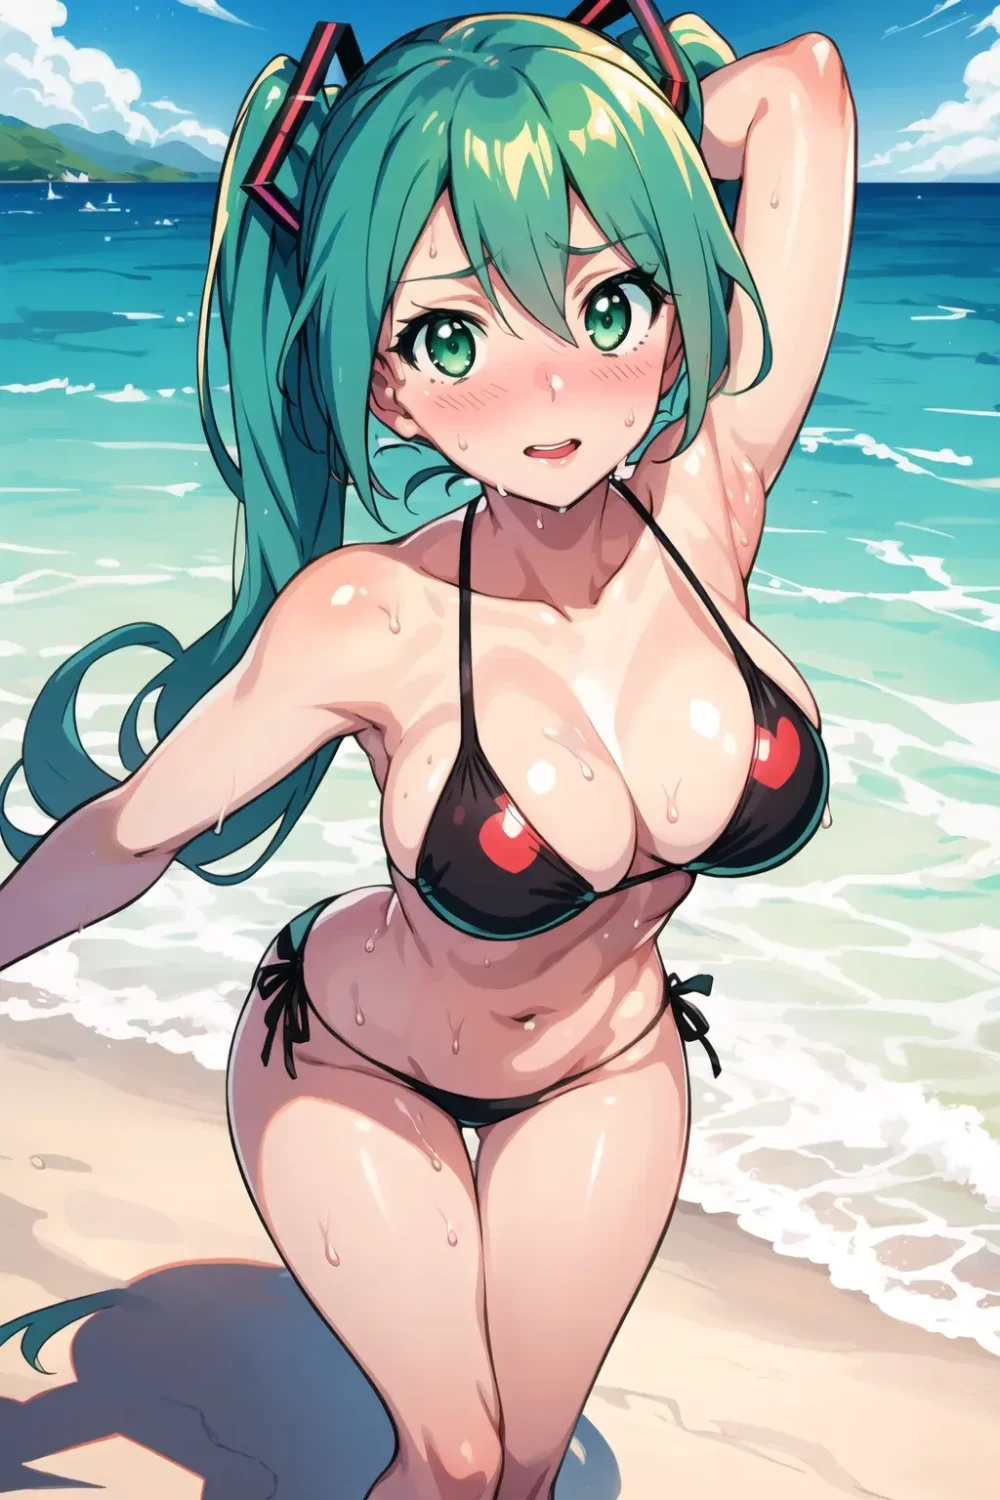 hatsune-miku-anime-style-all-ages-34